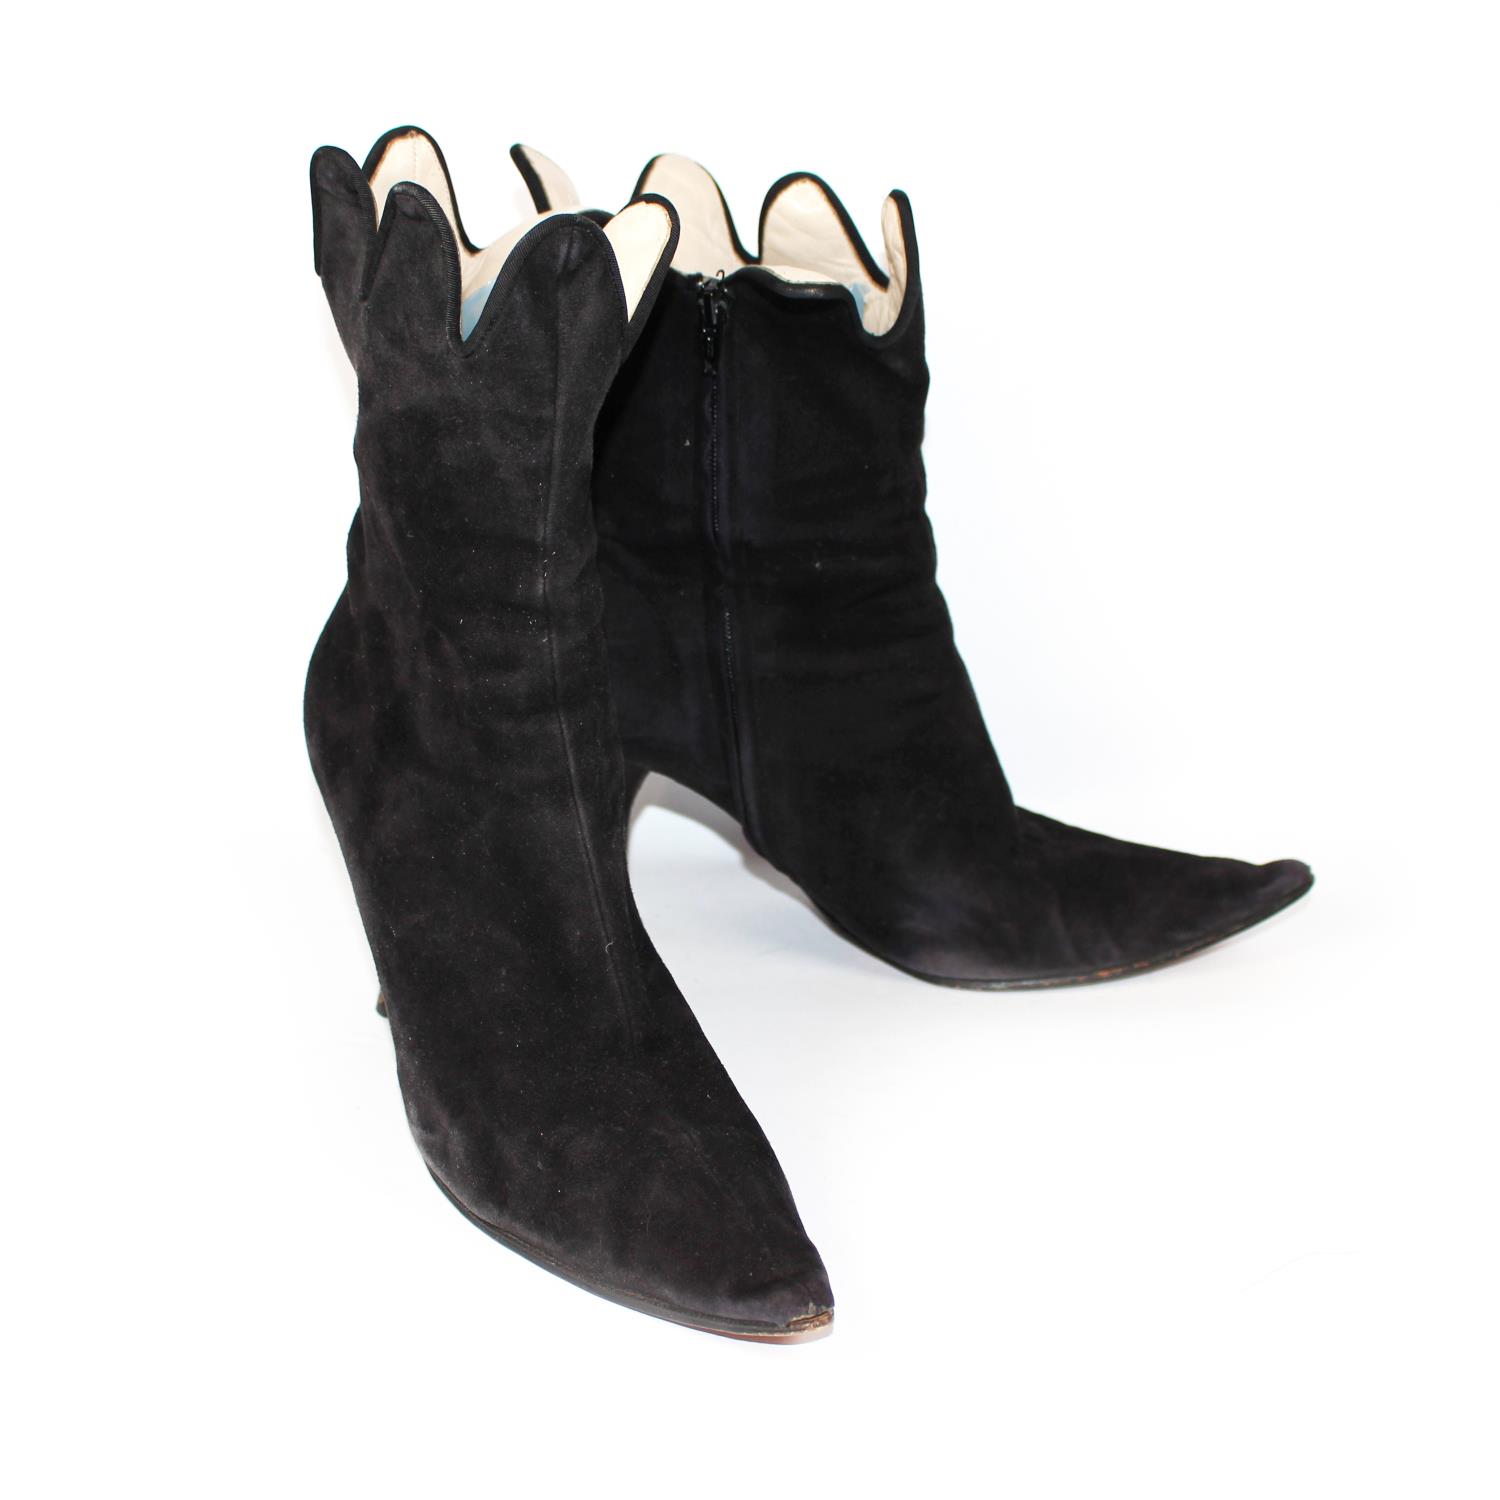 VIVENNE WESTWOOD, BLACK SUEDE ANKLE BOOTS With side zip, scalloped edge and pointed toe (size